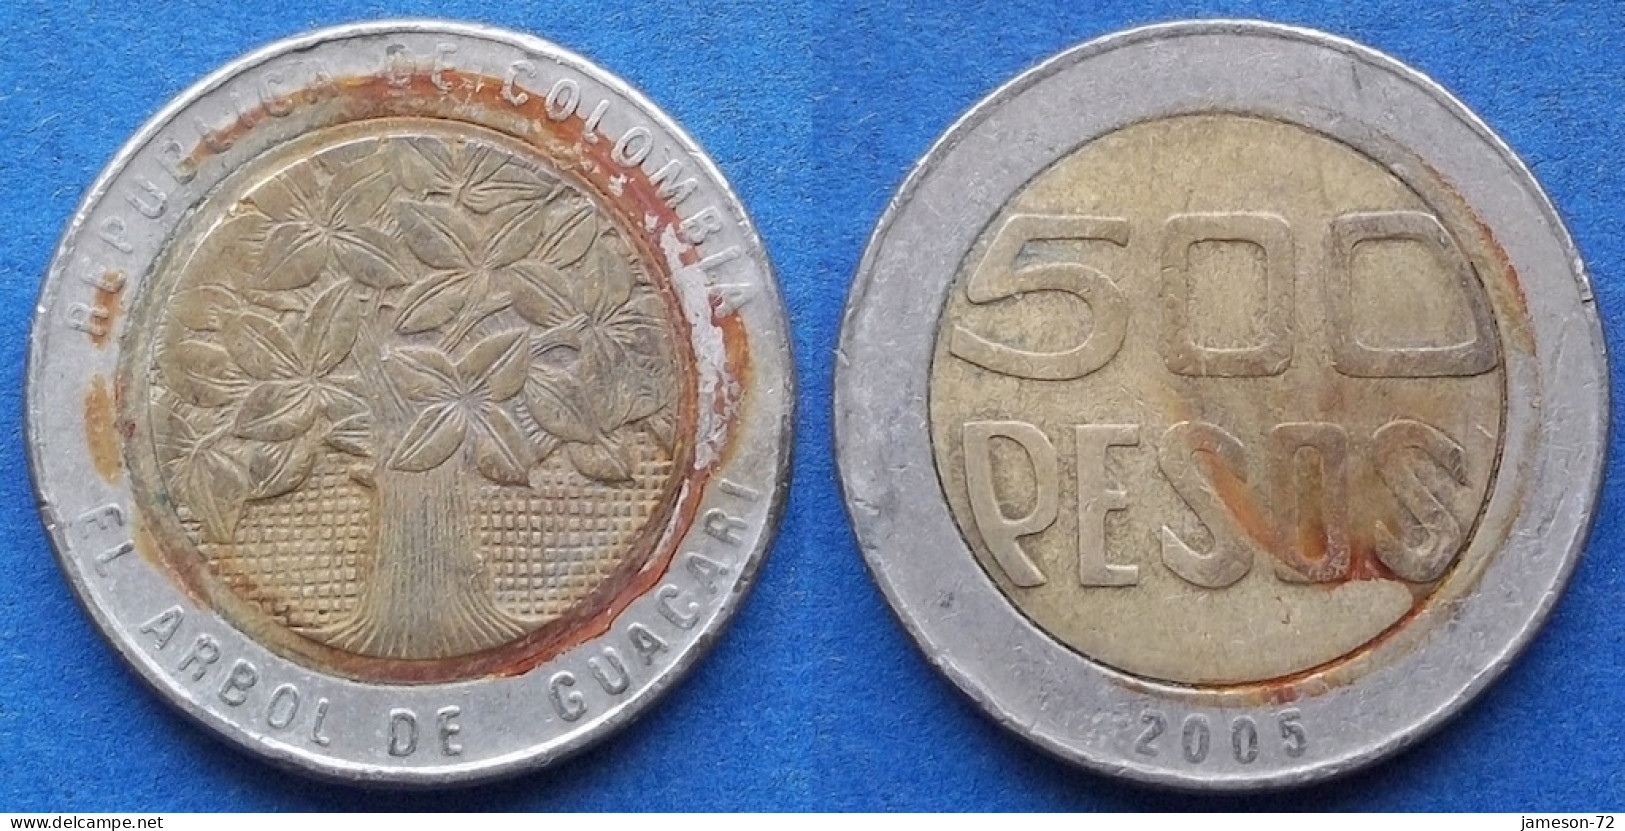 COLOMBIA - 500 Pesos 2005 "Guacari Tree" KM# 286 Republic - Edelweiss Coins - Colombie